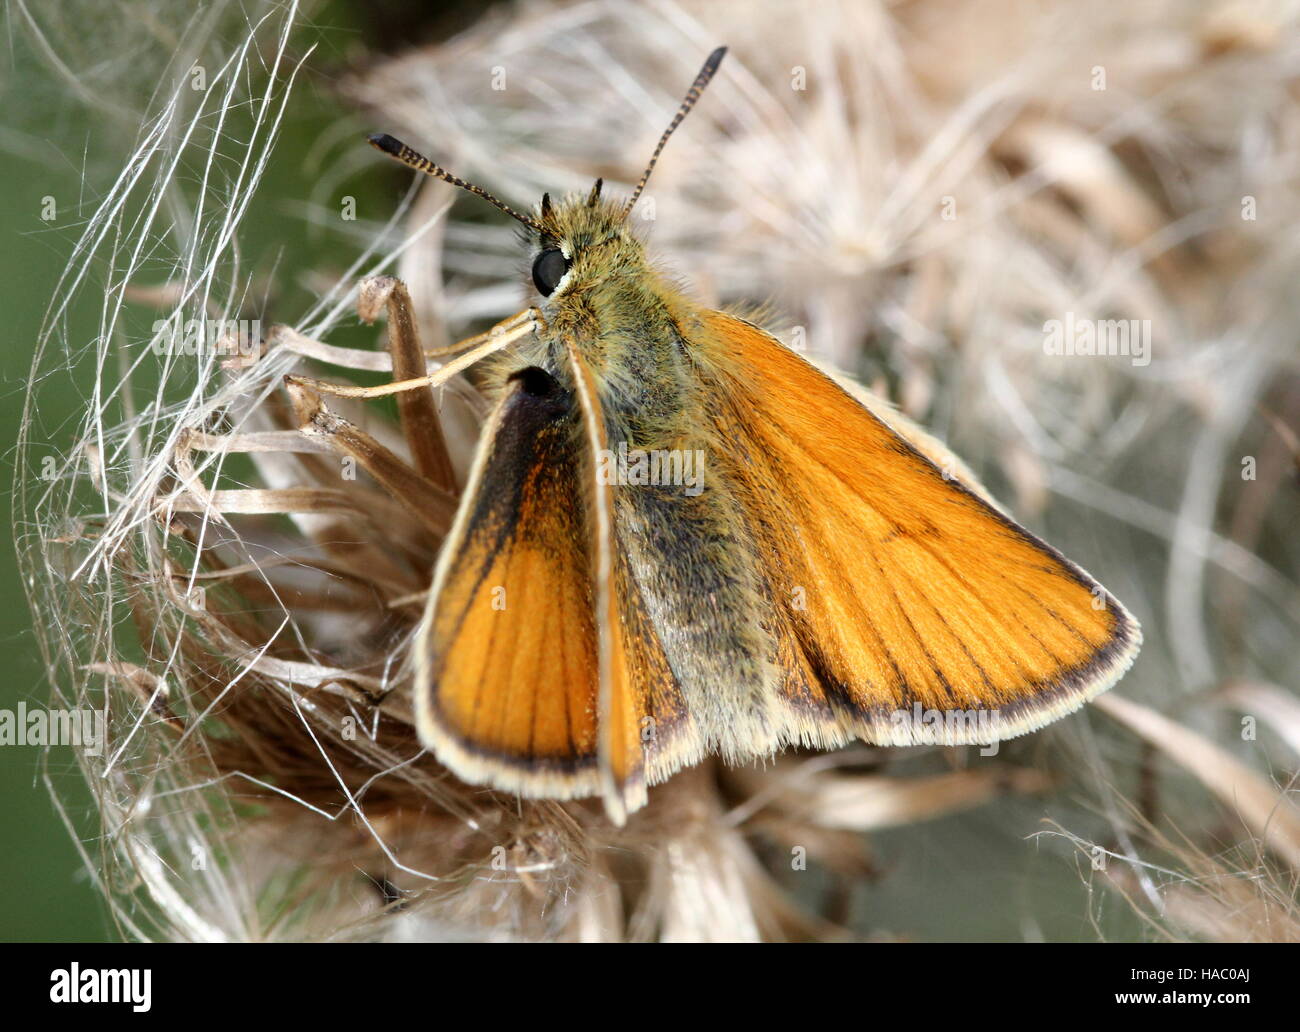 European Essex Skipper (Thymelicus lineola) on an overblown thistle Stock Photo